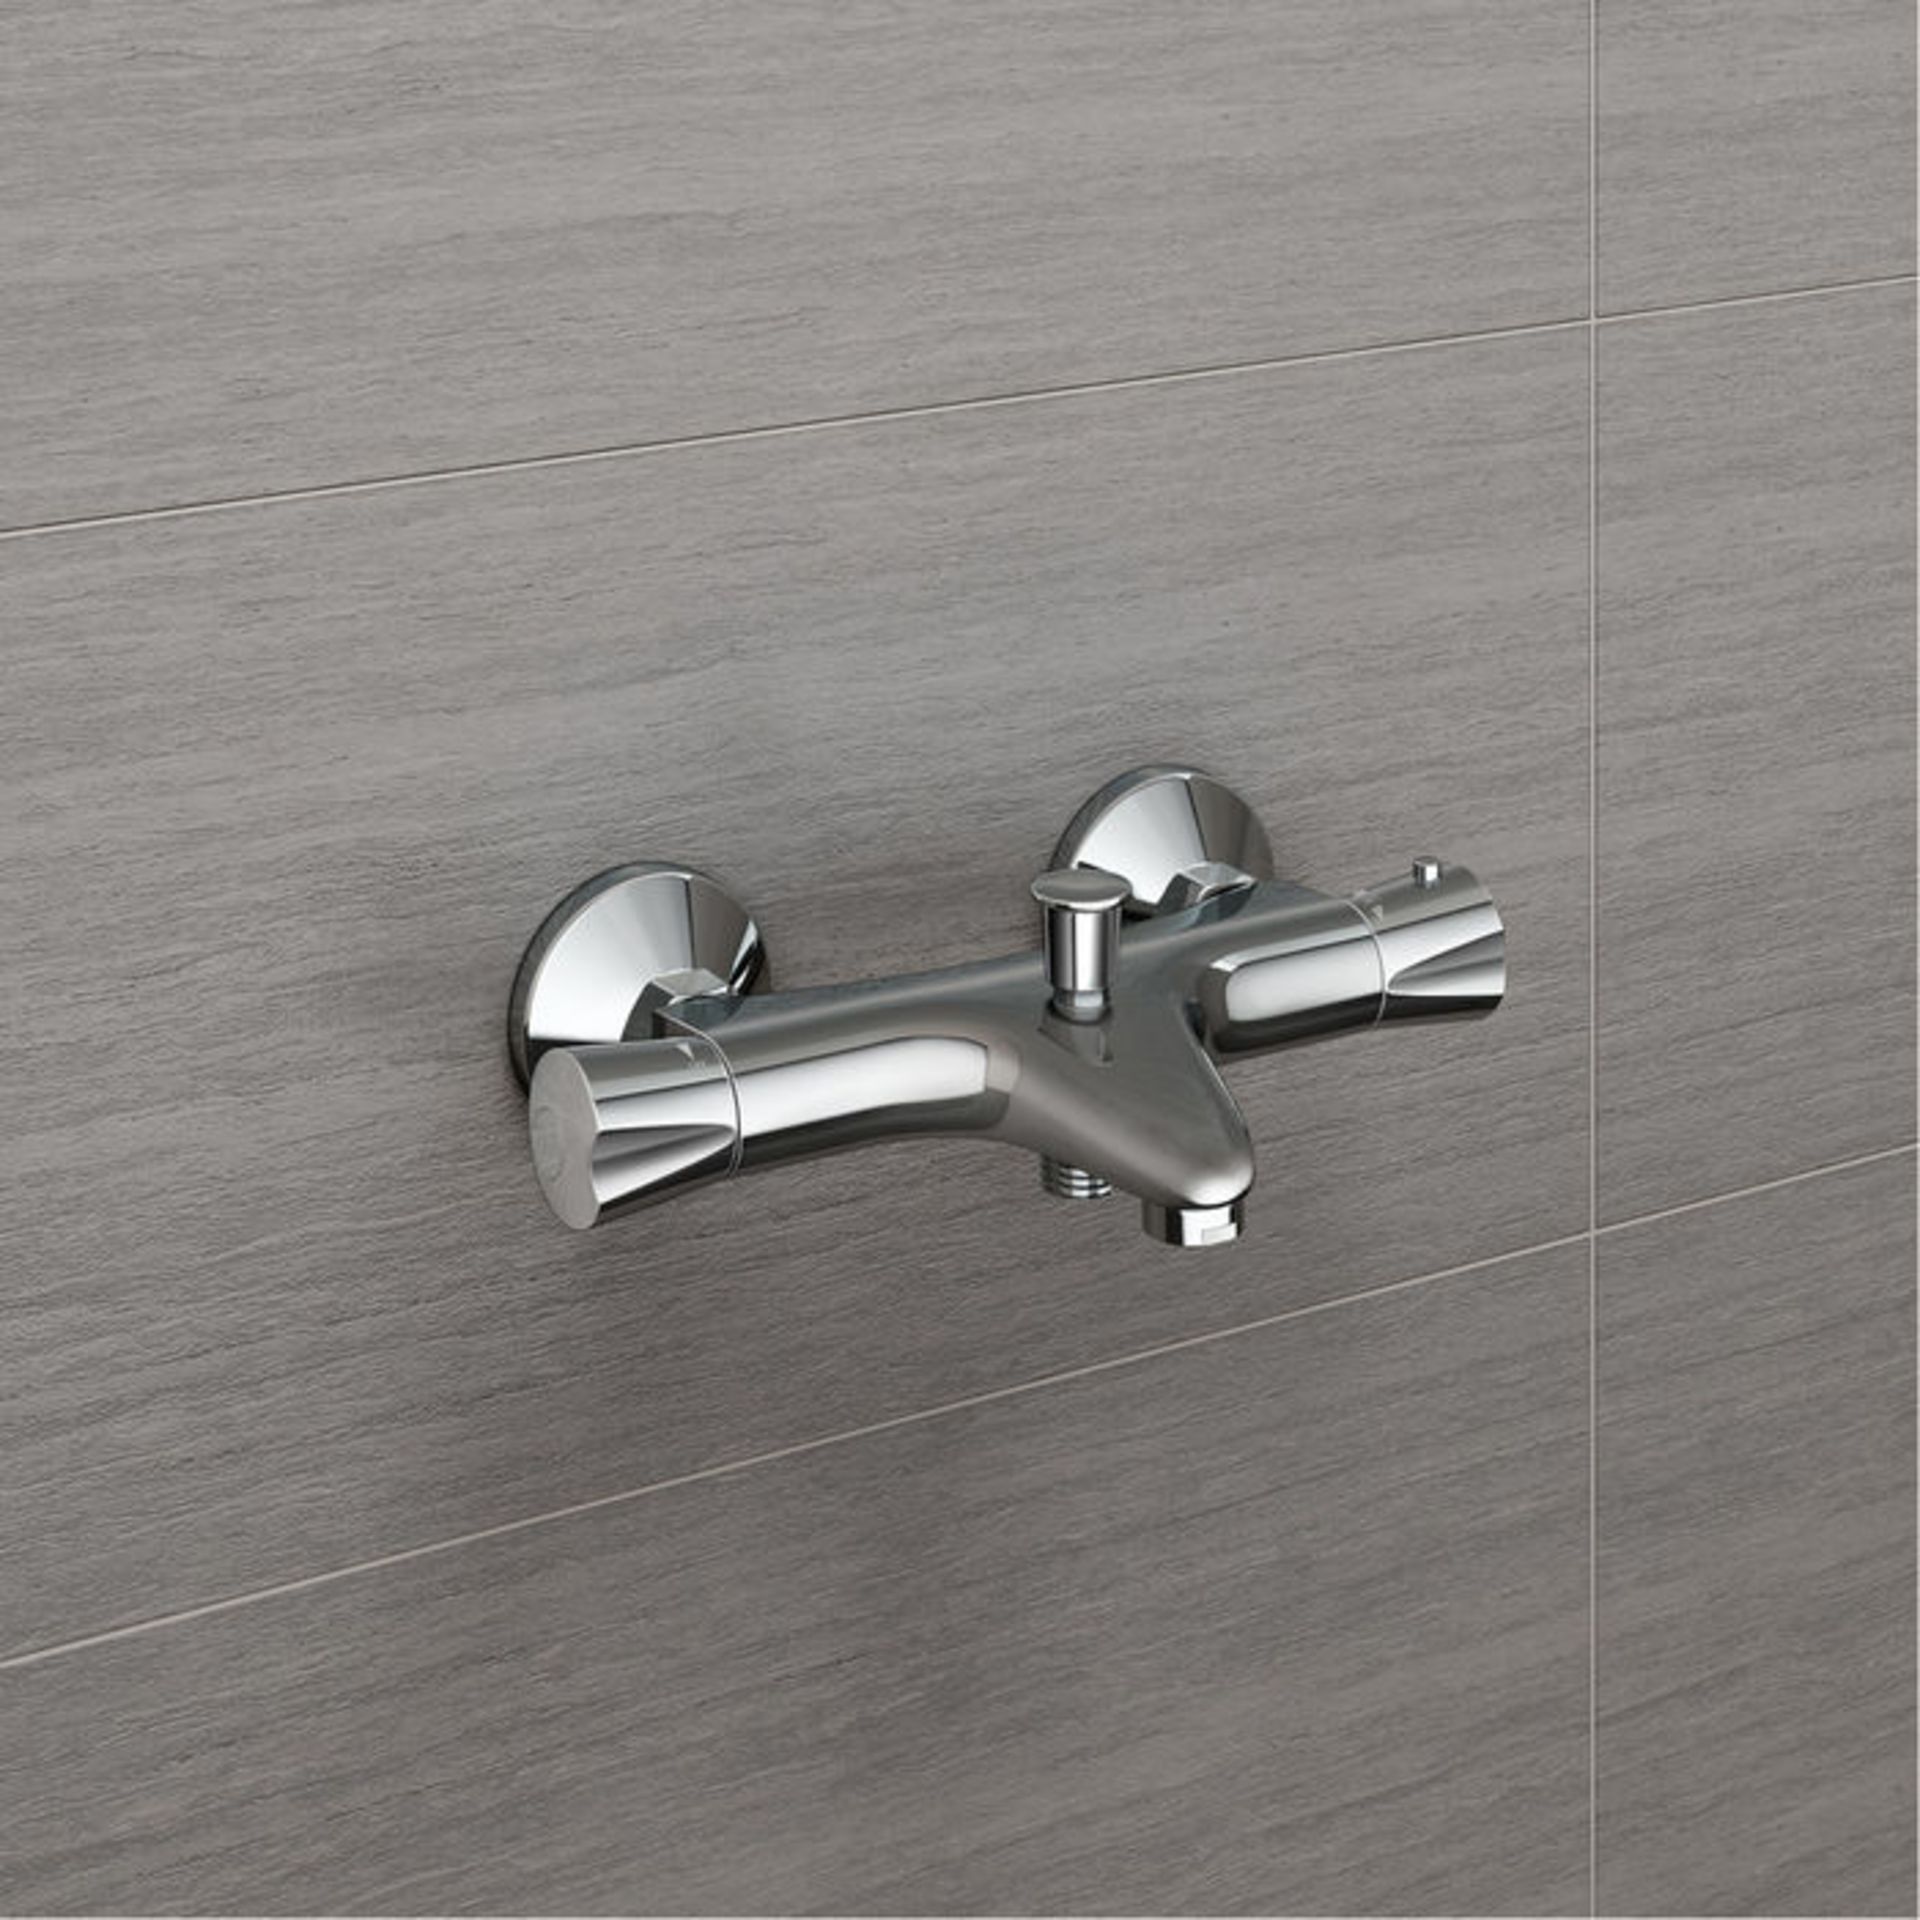 (D1015) Shower Mixer Valve with Bath Filler Chrome Plated Solid Brass Mixer Thermostatic mixe... - Image 2 of 3